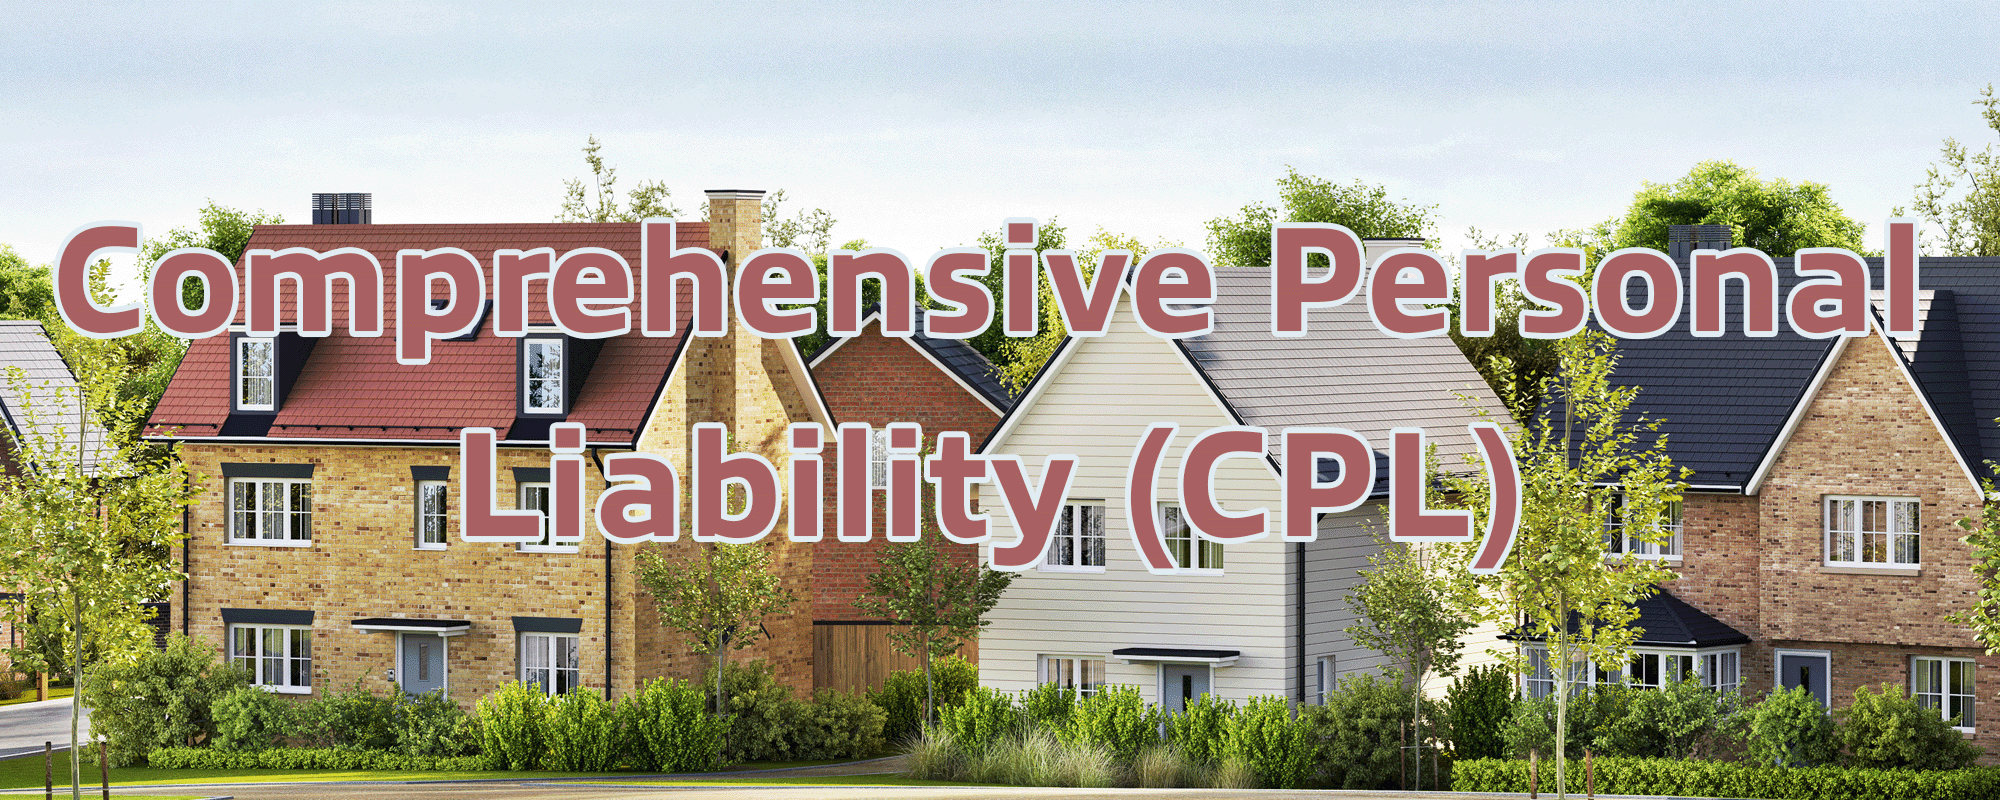 Featured image for “Comprehensive Personal Liability (CPL)”